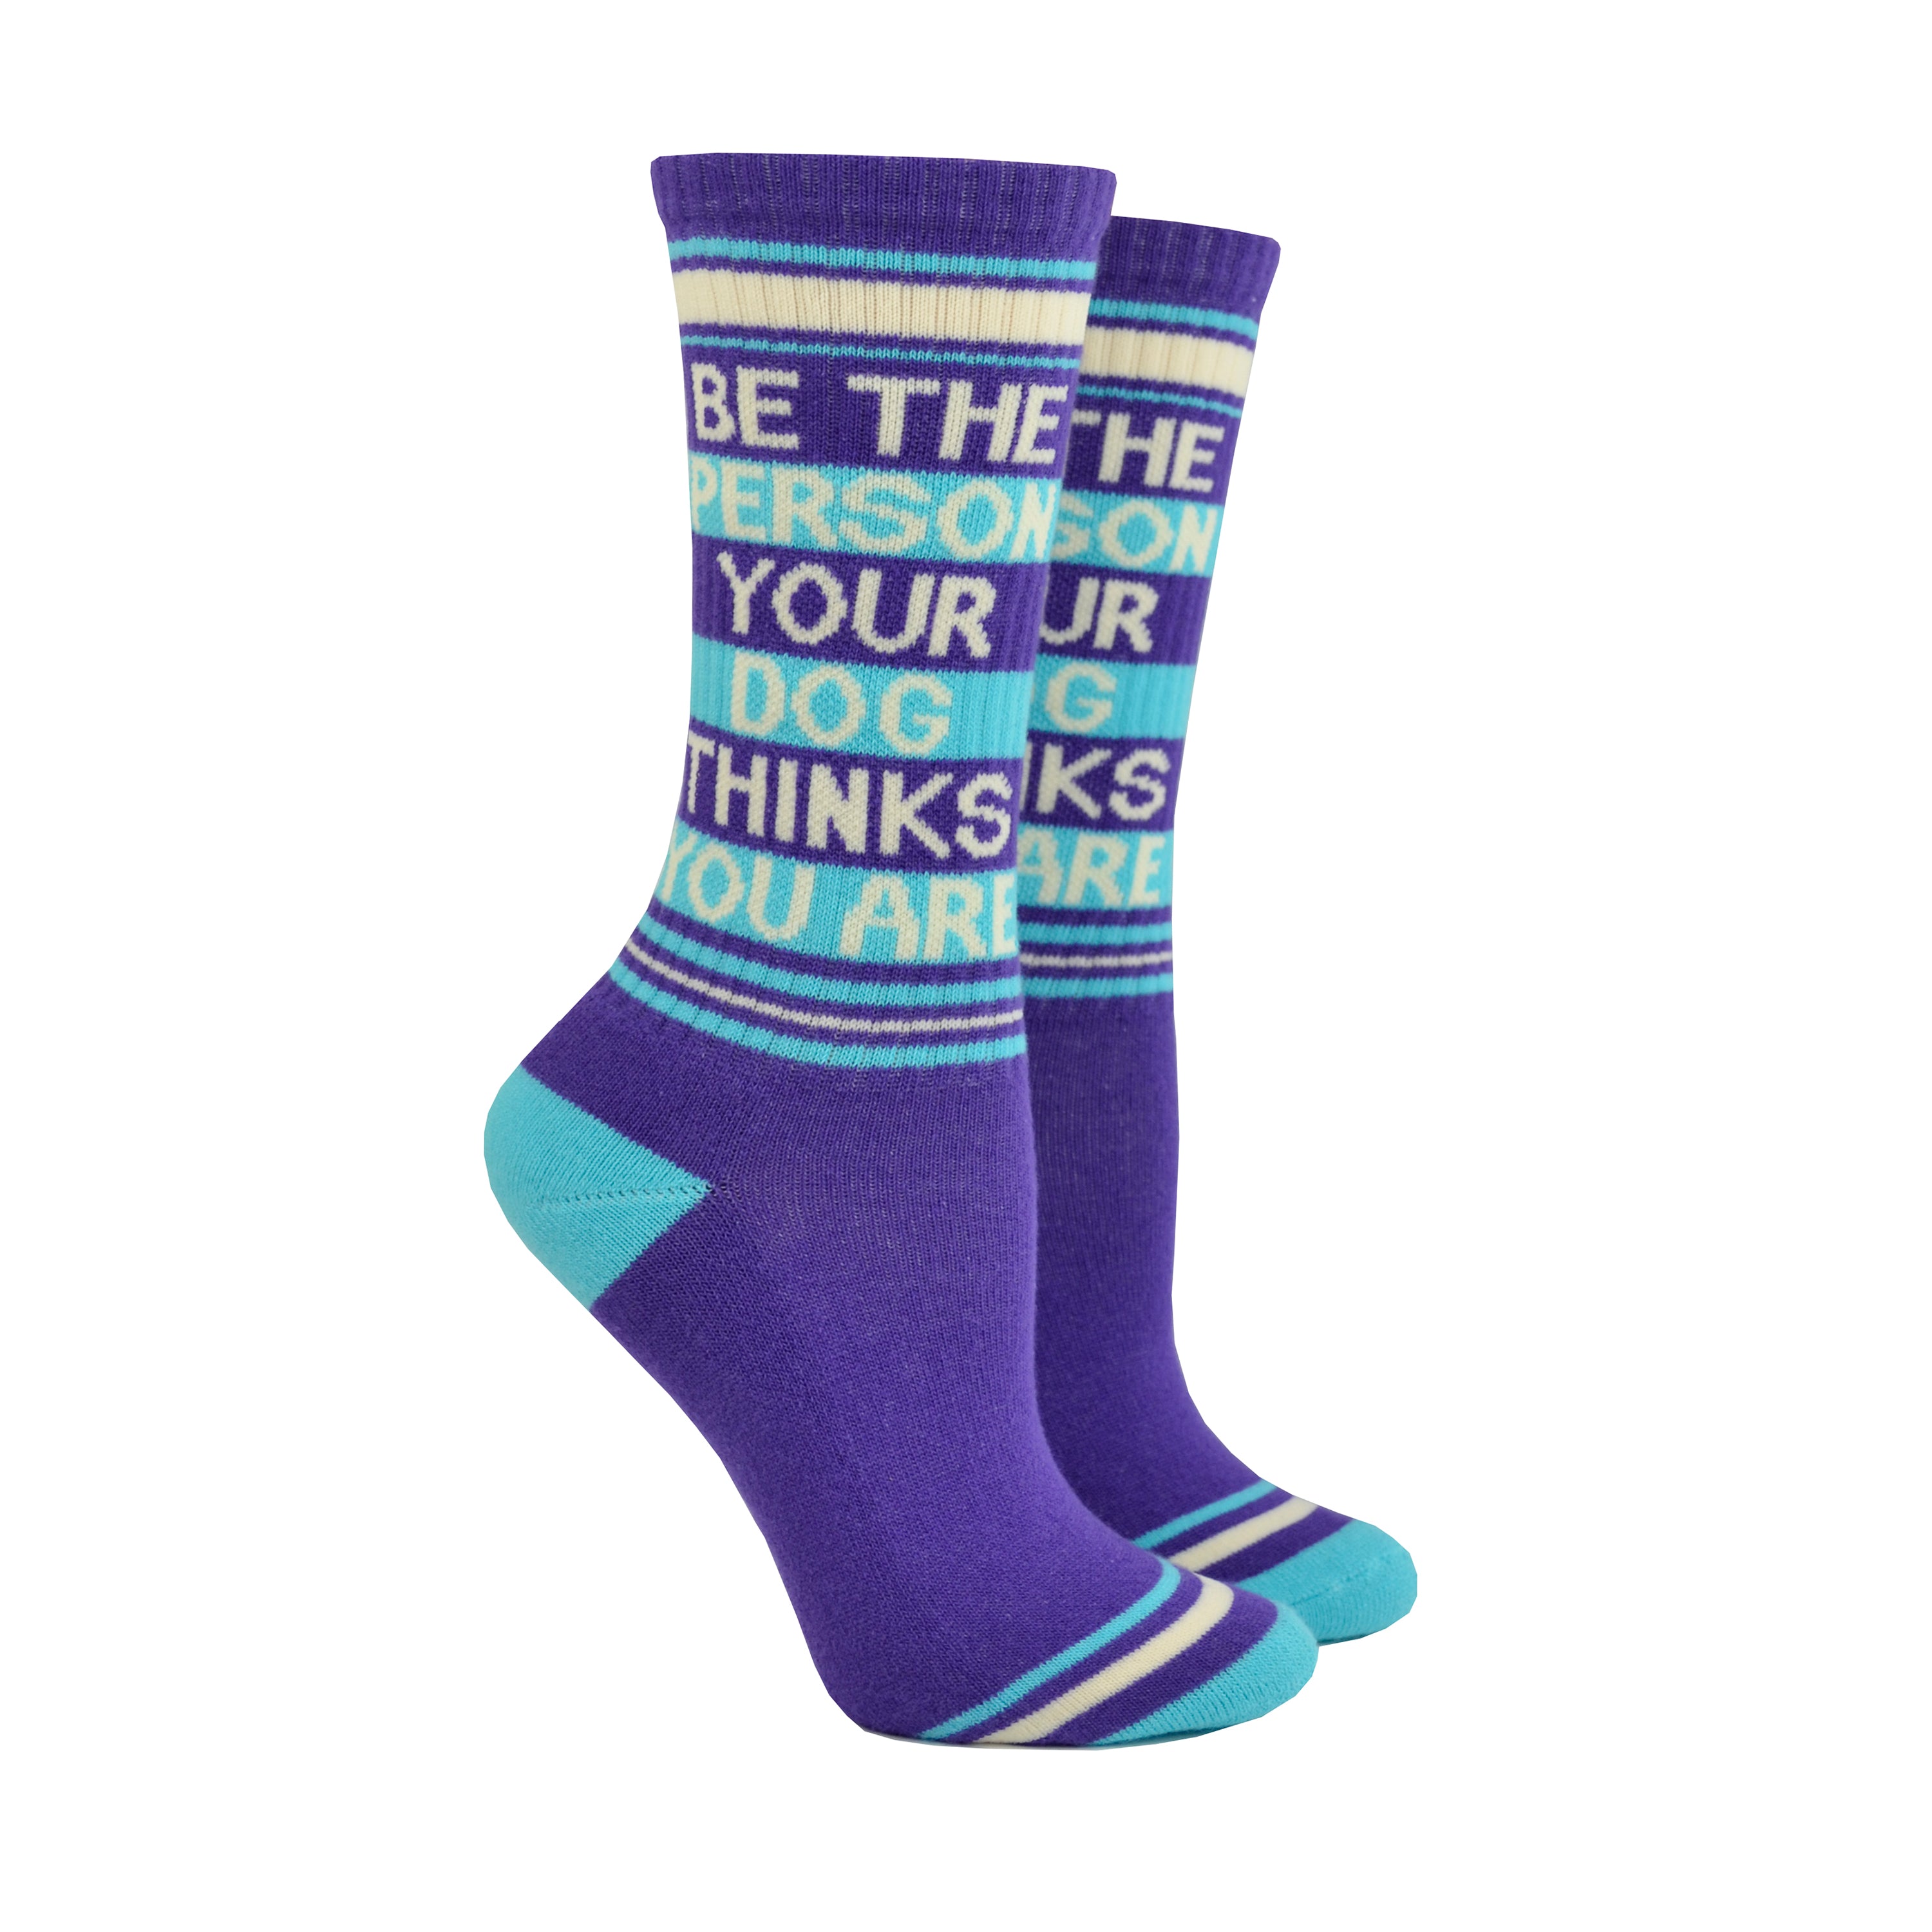 Shown on leg forms, a pair of Gumball Poodle brand unisex cotton crew sock in purple with cream and blue stripes around the leg and a blue heel and toe. On the side of the sock in cream lettering it says, 